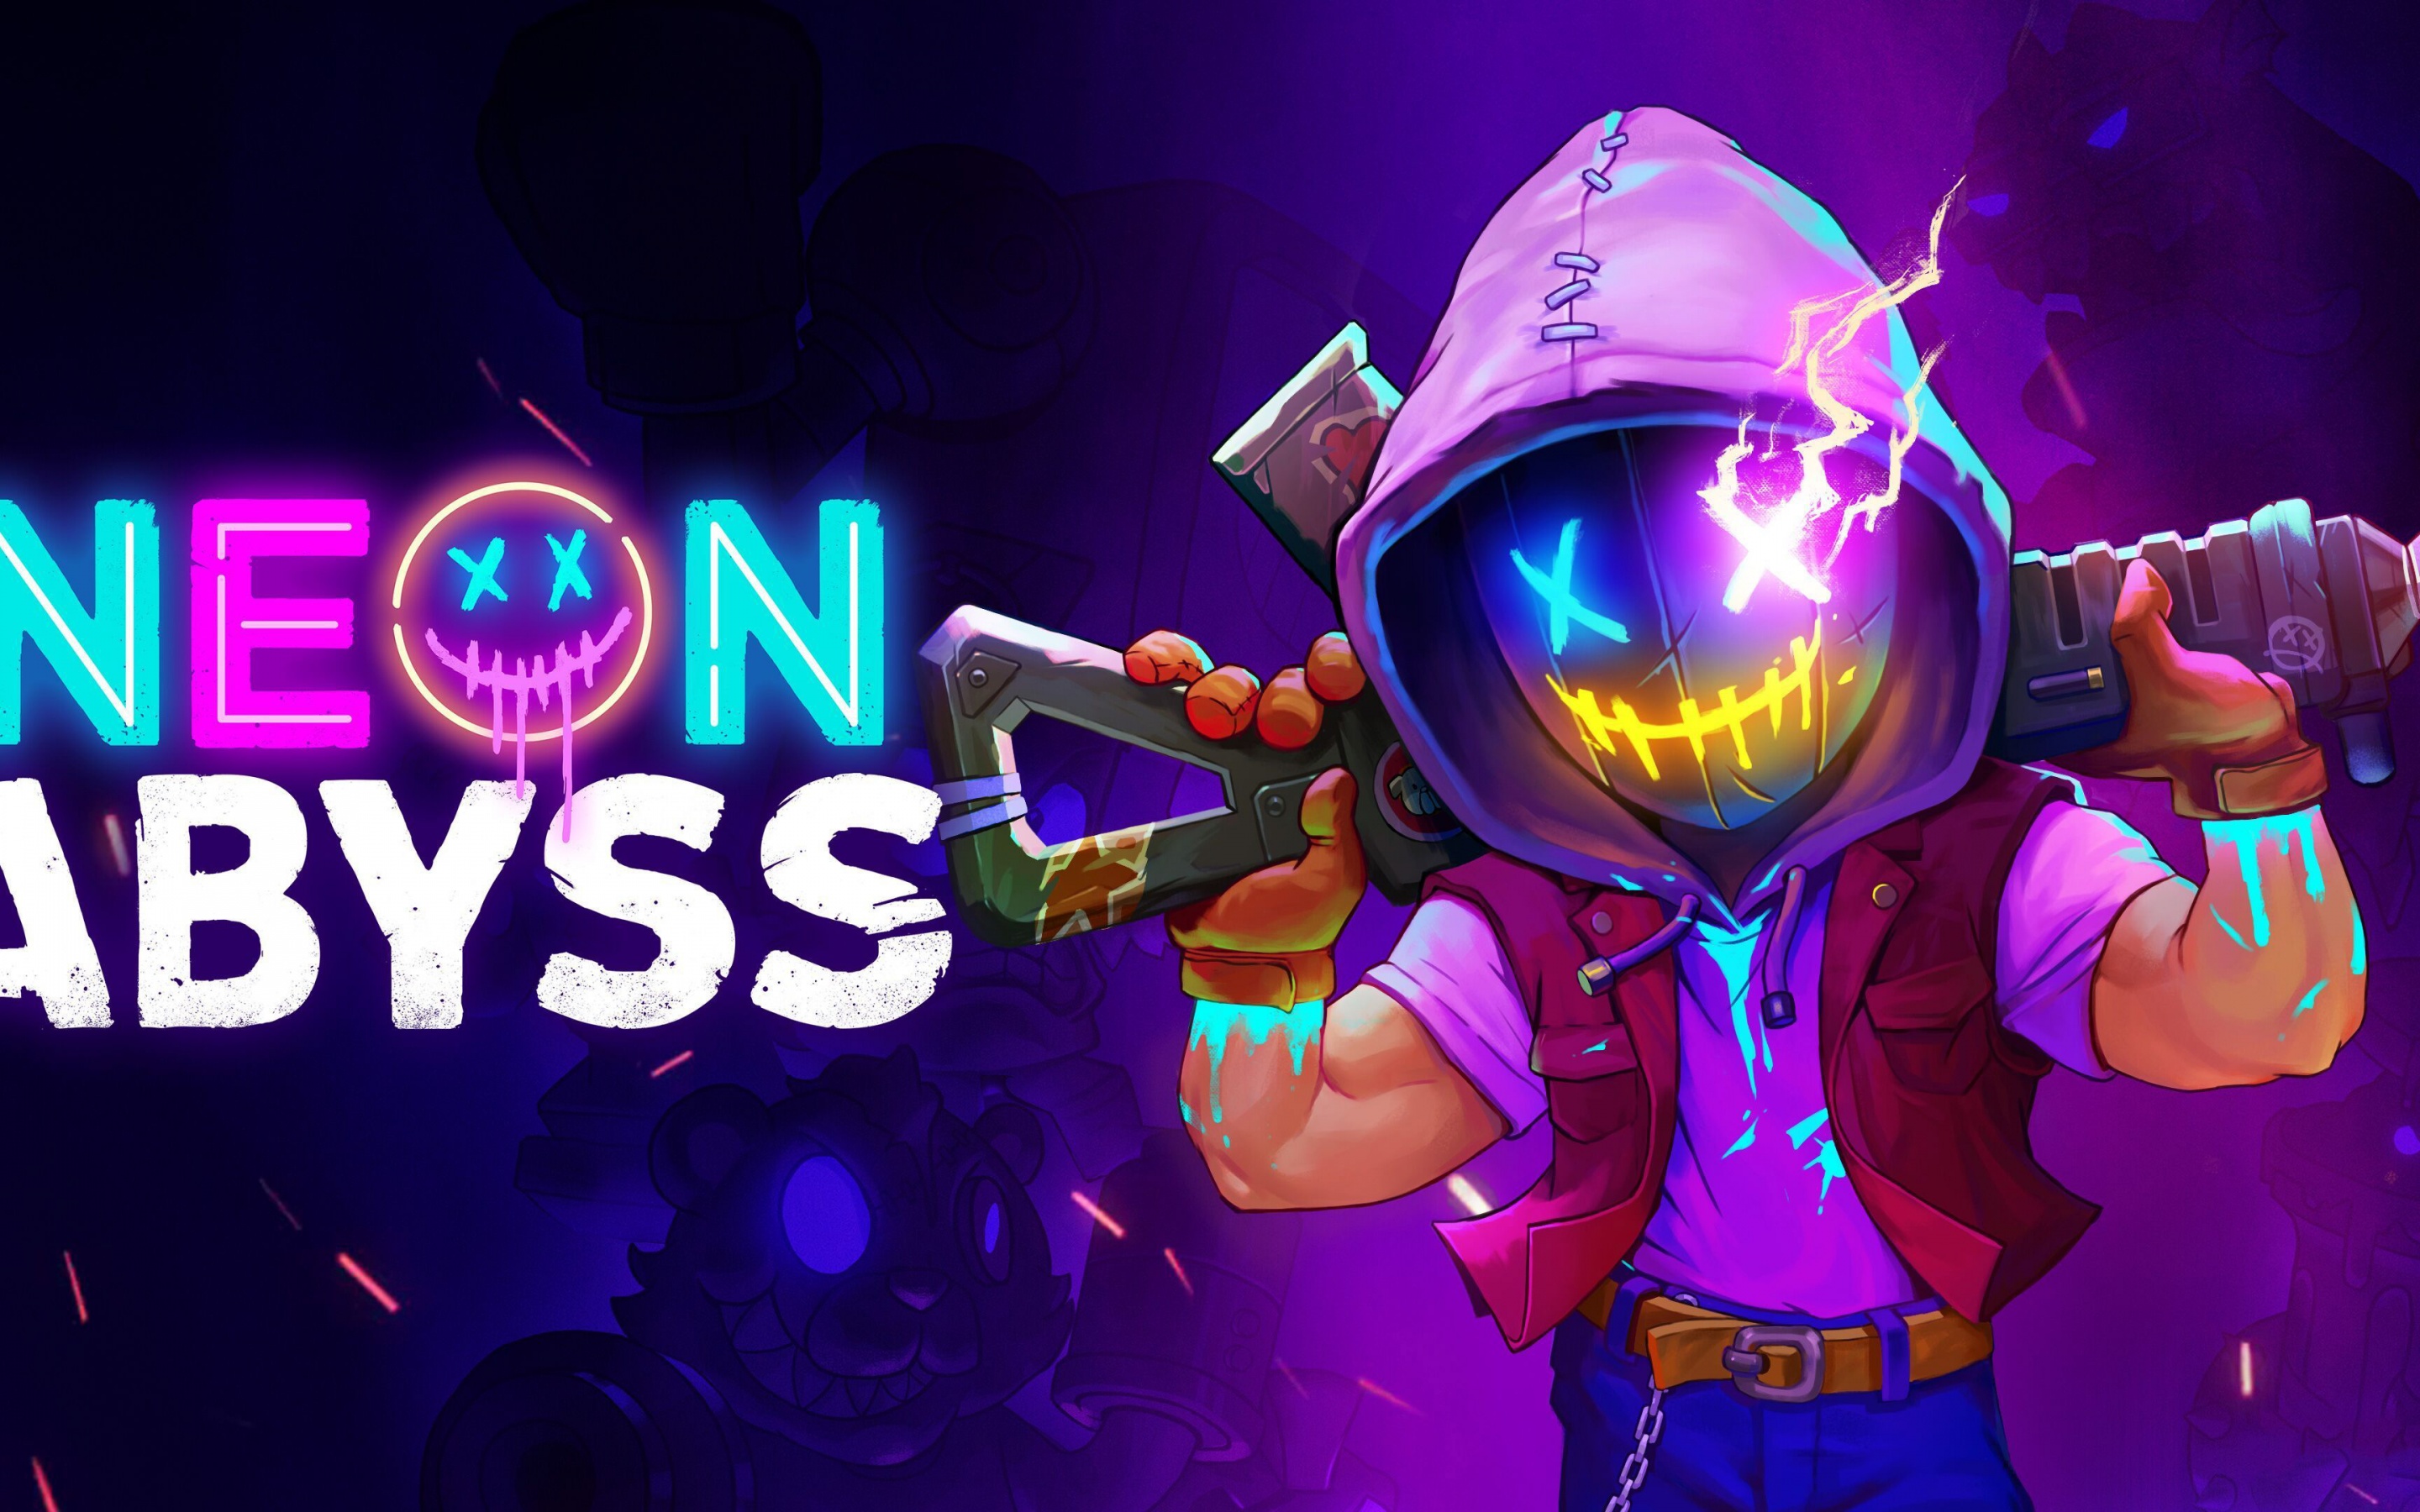 Neon Abyss Wallpaper 4K, PlayStation 4, Xbox One, Nintendo Switch